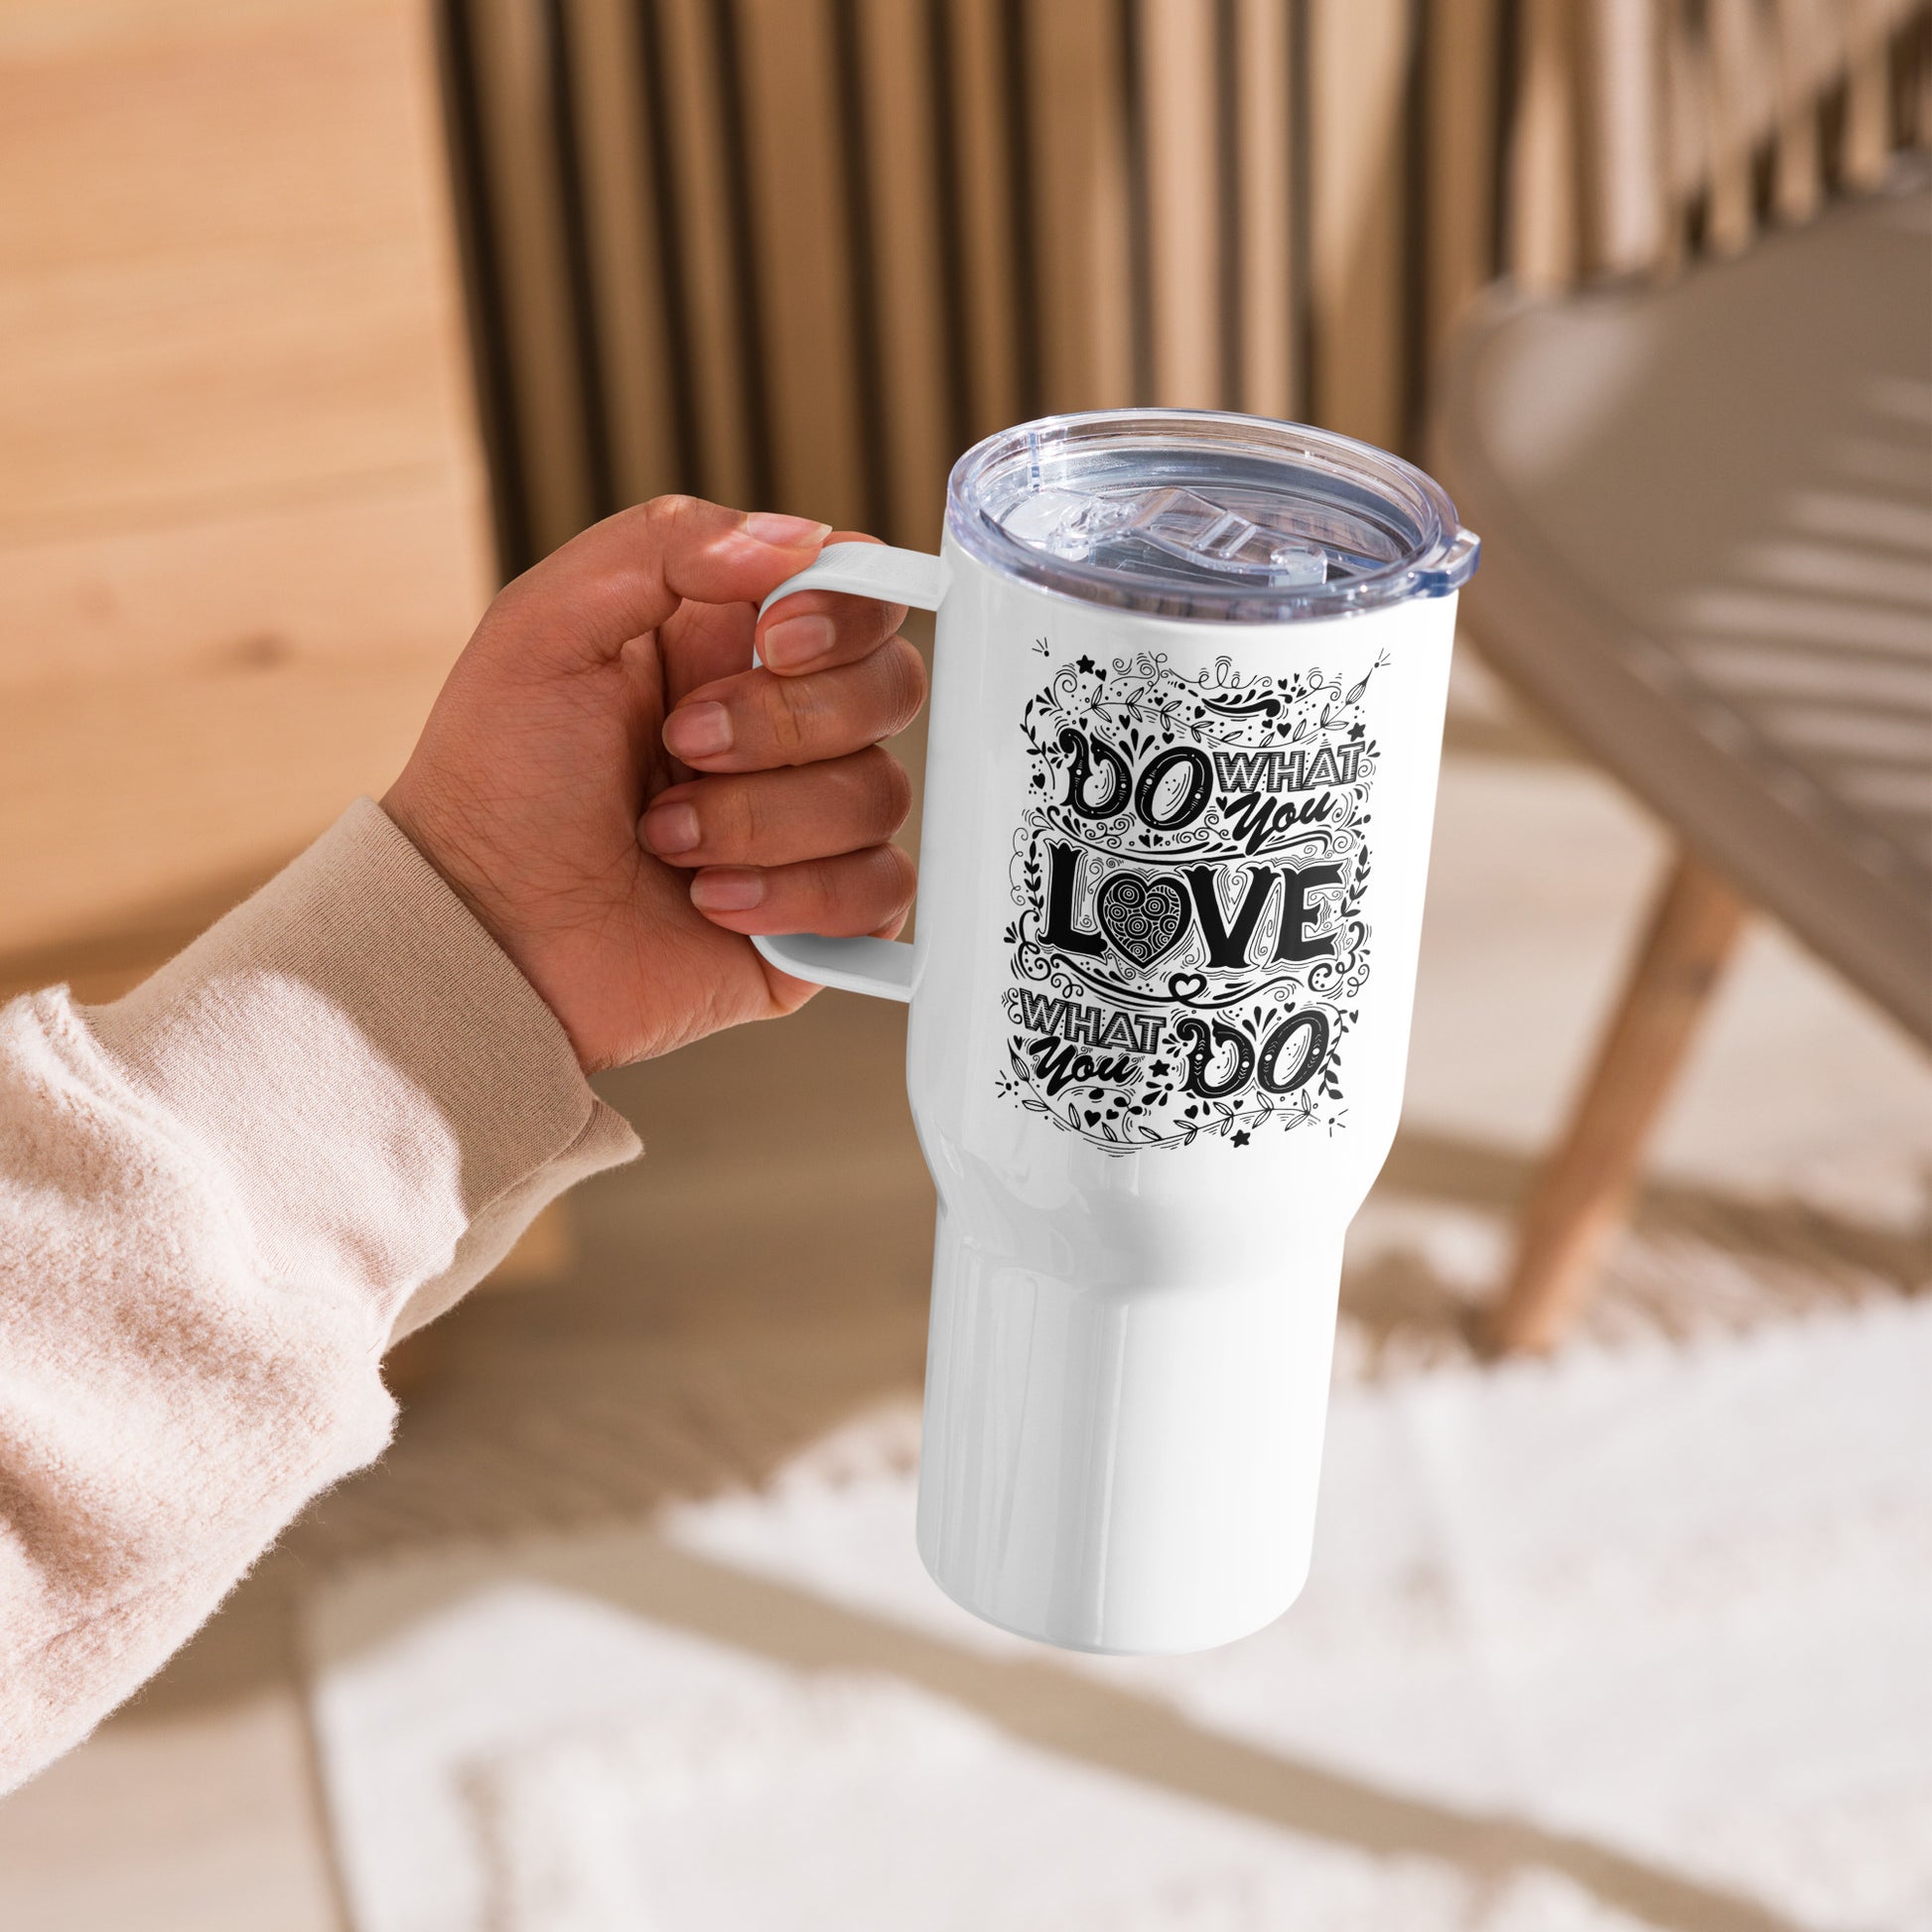 Love what you do Travel mug with a handle CedarHill Country Market